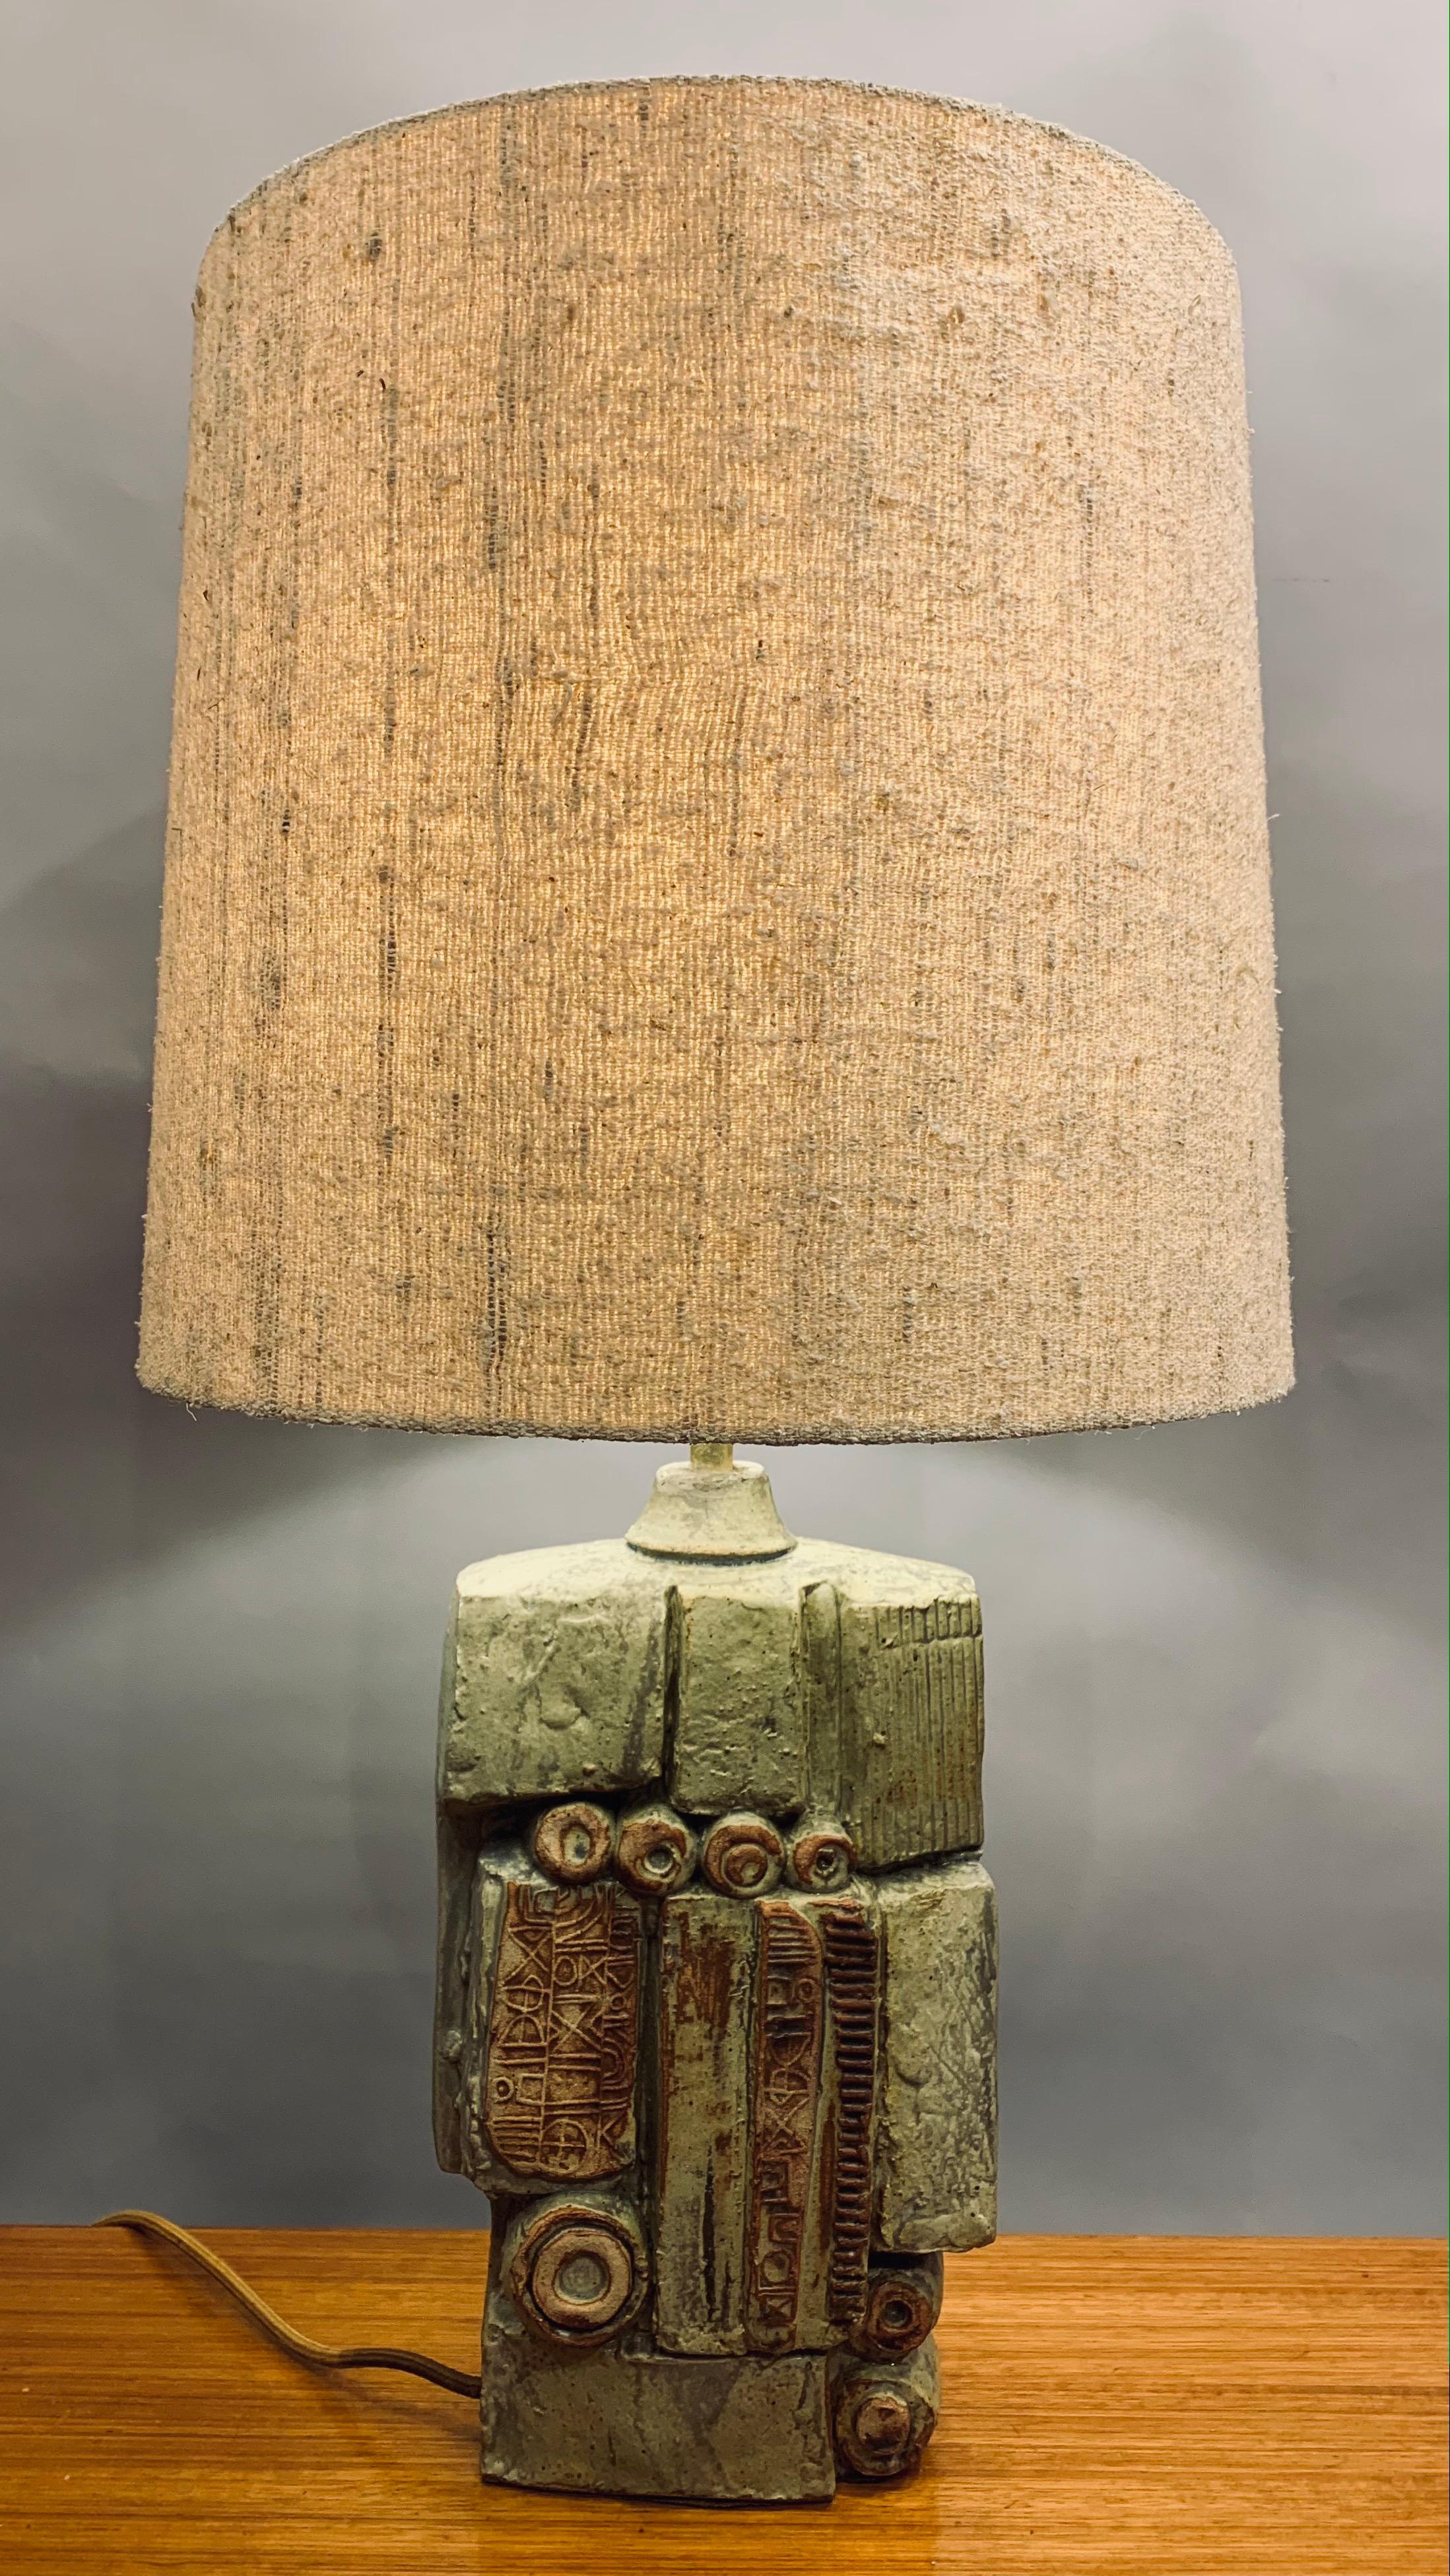 An unusual abstract ceramic table lamp designed by Bernard Rooke in England during the 1960s.  This abstract and sculptural handmade piece in natural terracotta stone combined with both unglazed and glazed contrasting finishes. In excellent vintage